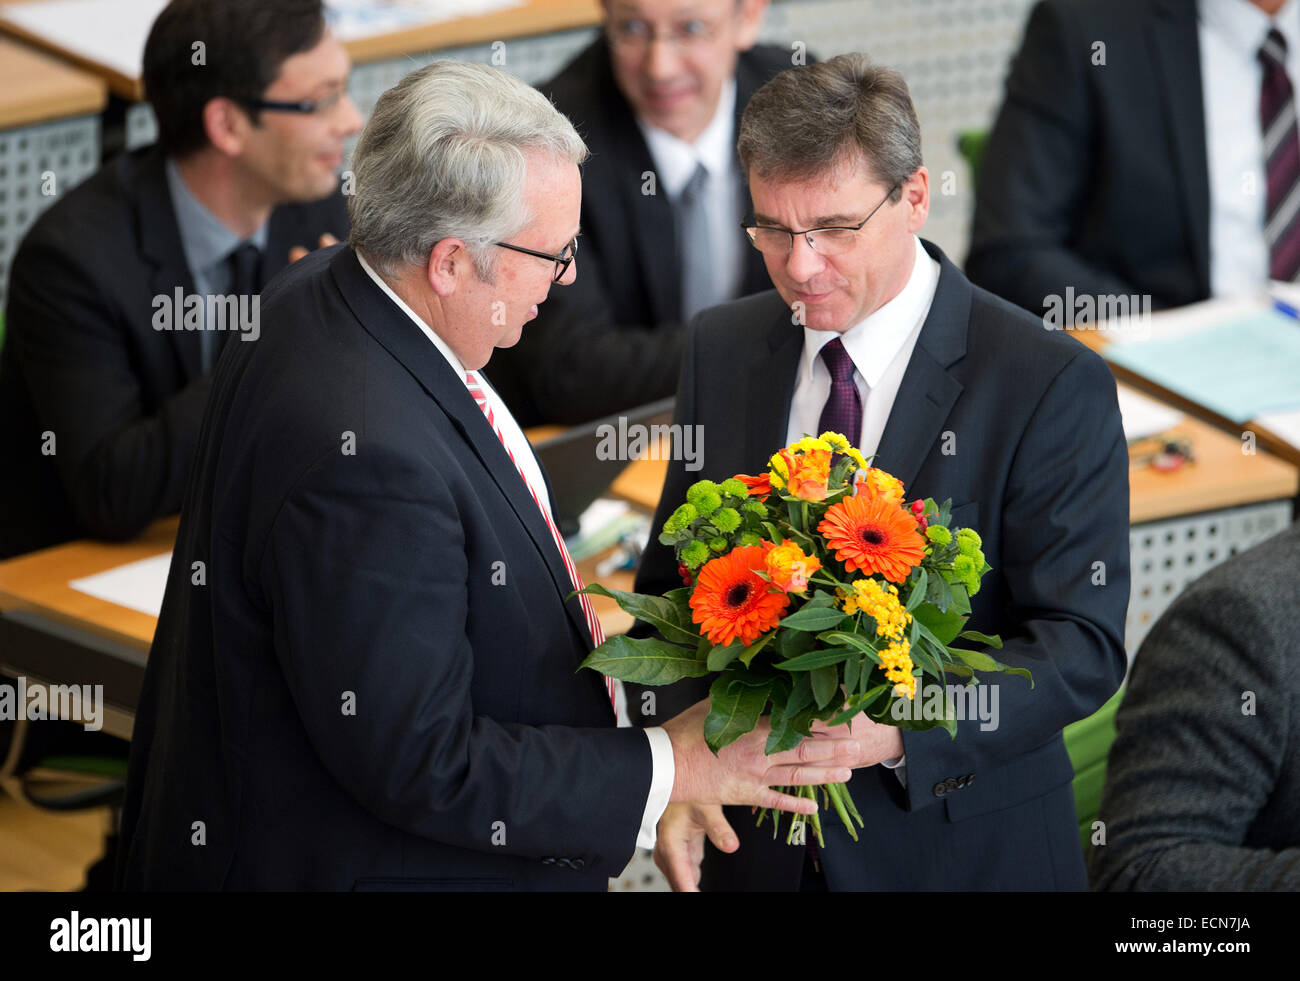 Dresden, Germany. 17th Dec, 2014. The chairman of the regional parliamentary faction of the CDU, Frank Kupfer (R), hands a buquet of flowers to Saxony's new commissioner for foreigners in Saxony, Geert Mackenroth (CDU), after his election at Saxony's state parliament in Dresden, Germany, 17 December 2014. Photo: Arno Burgi/dpa/Alamy Live News Stock Photo